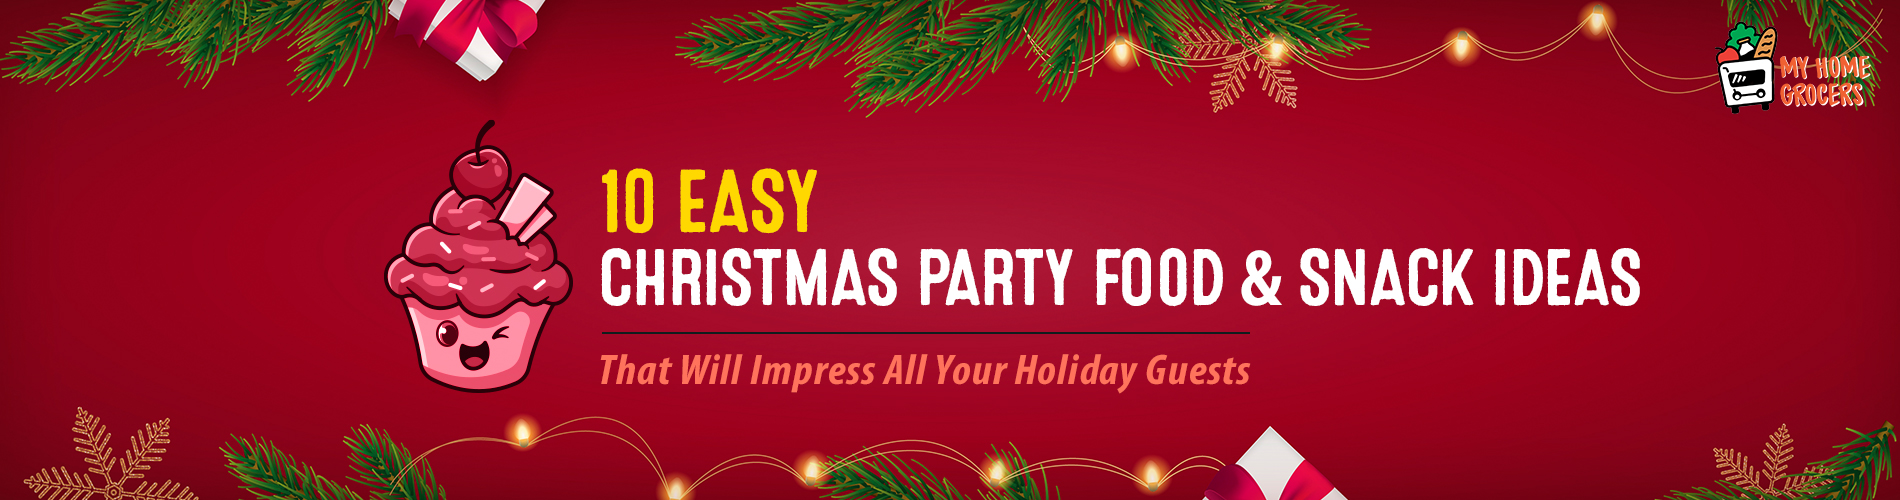 10 Easy Christmas Party Food and Snack Ideas